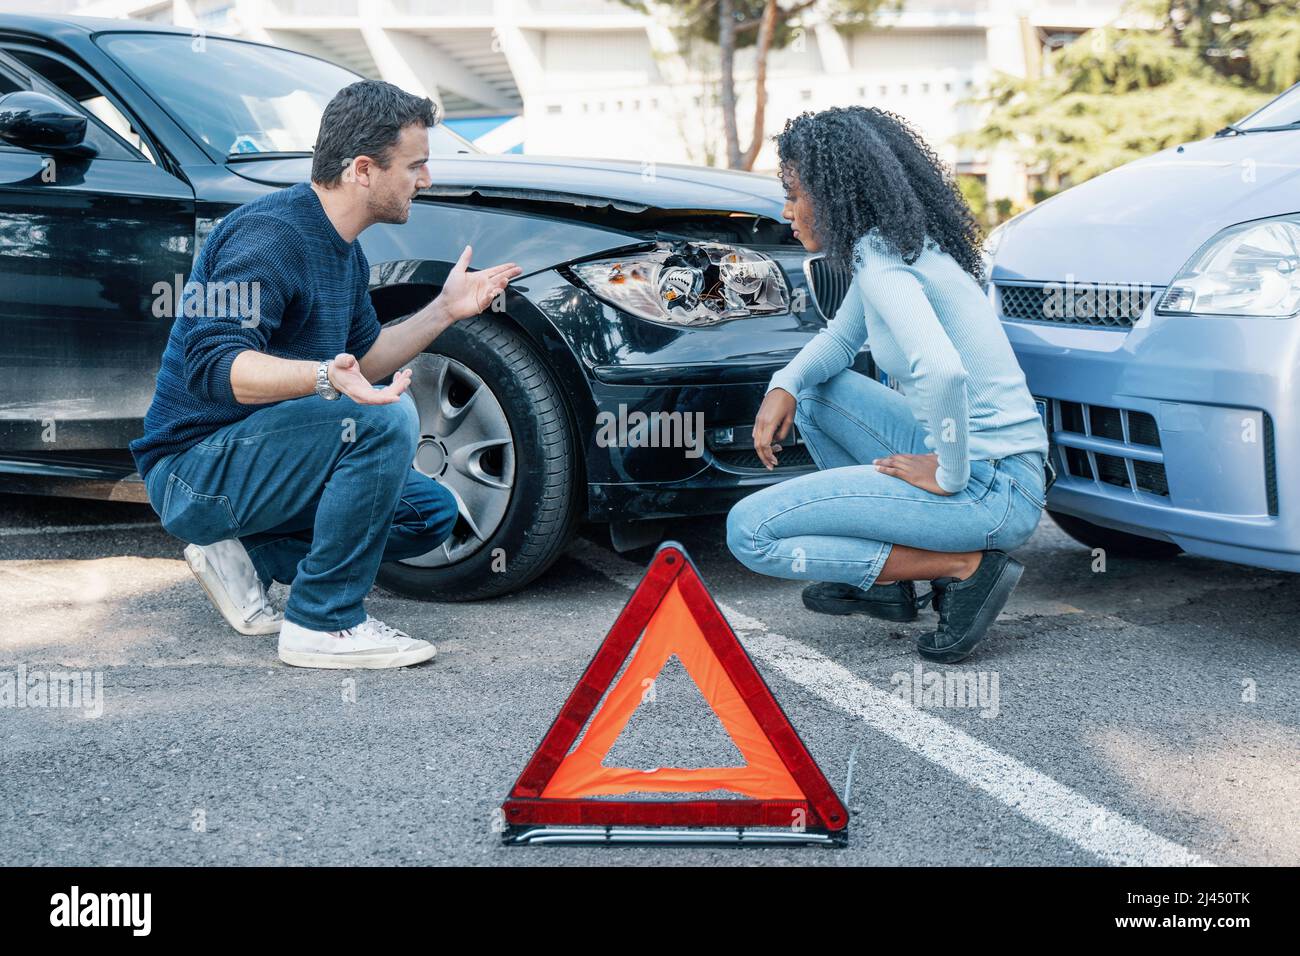 Two people arguing after a car accident argue Stock Photo